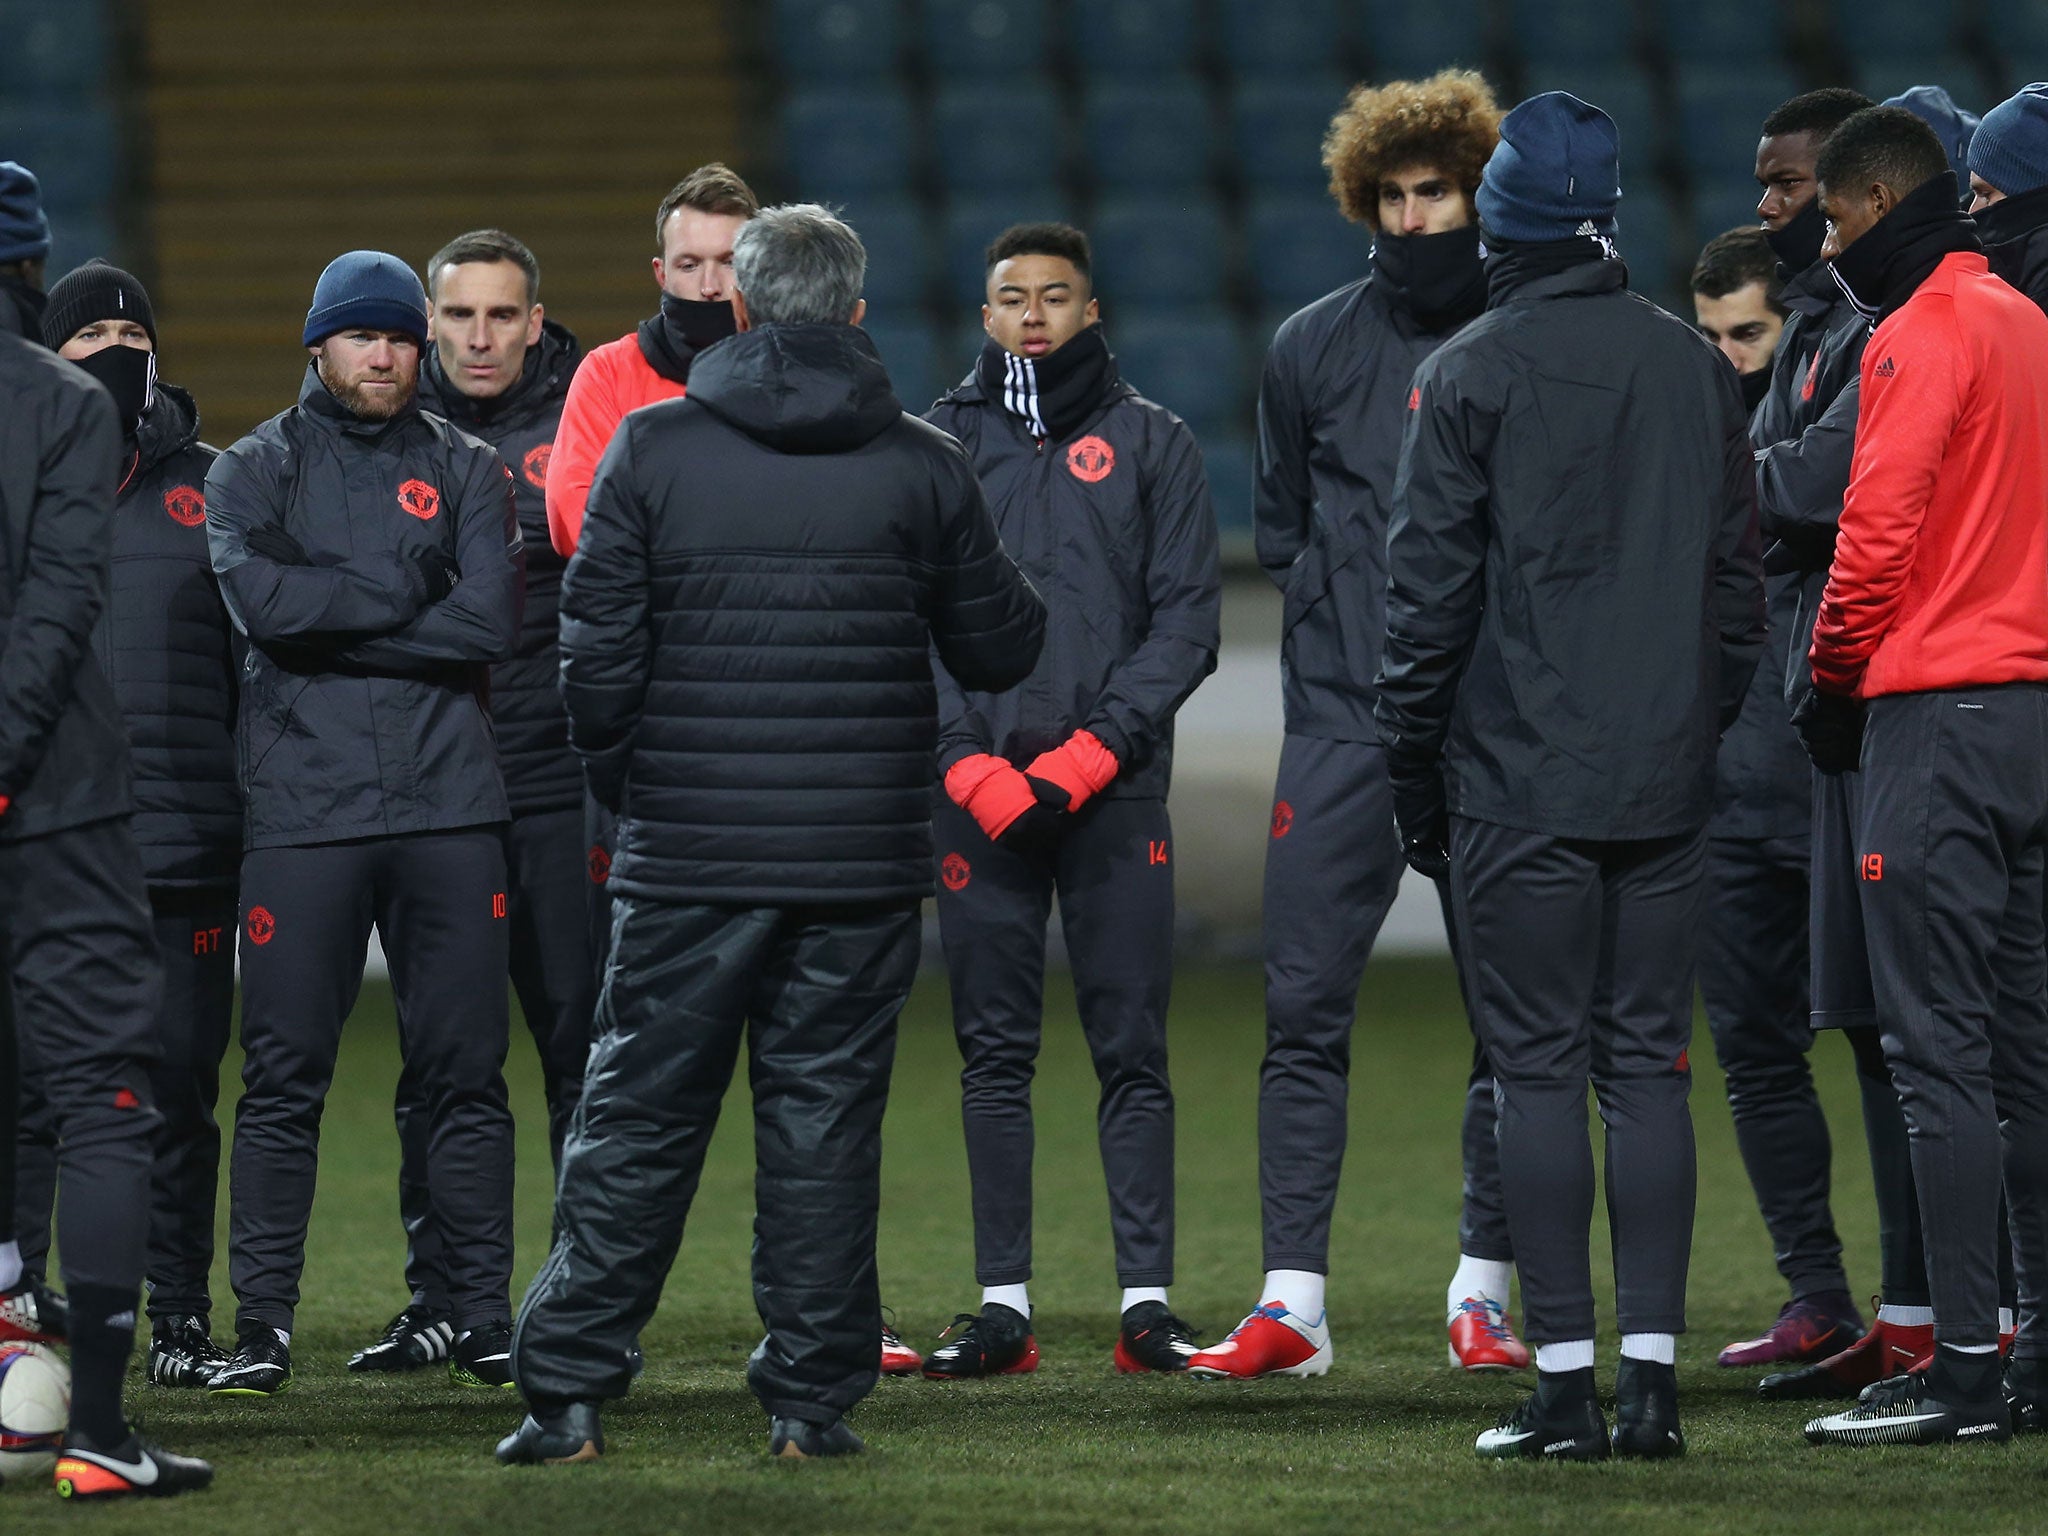 United braved the cold on Wednesday evening to take to training at the Chornomorets Stadium